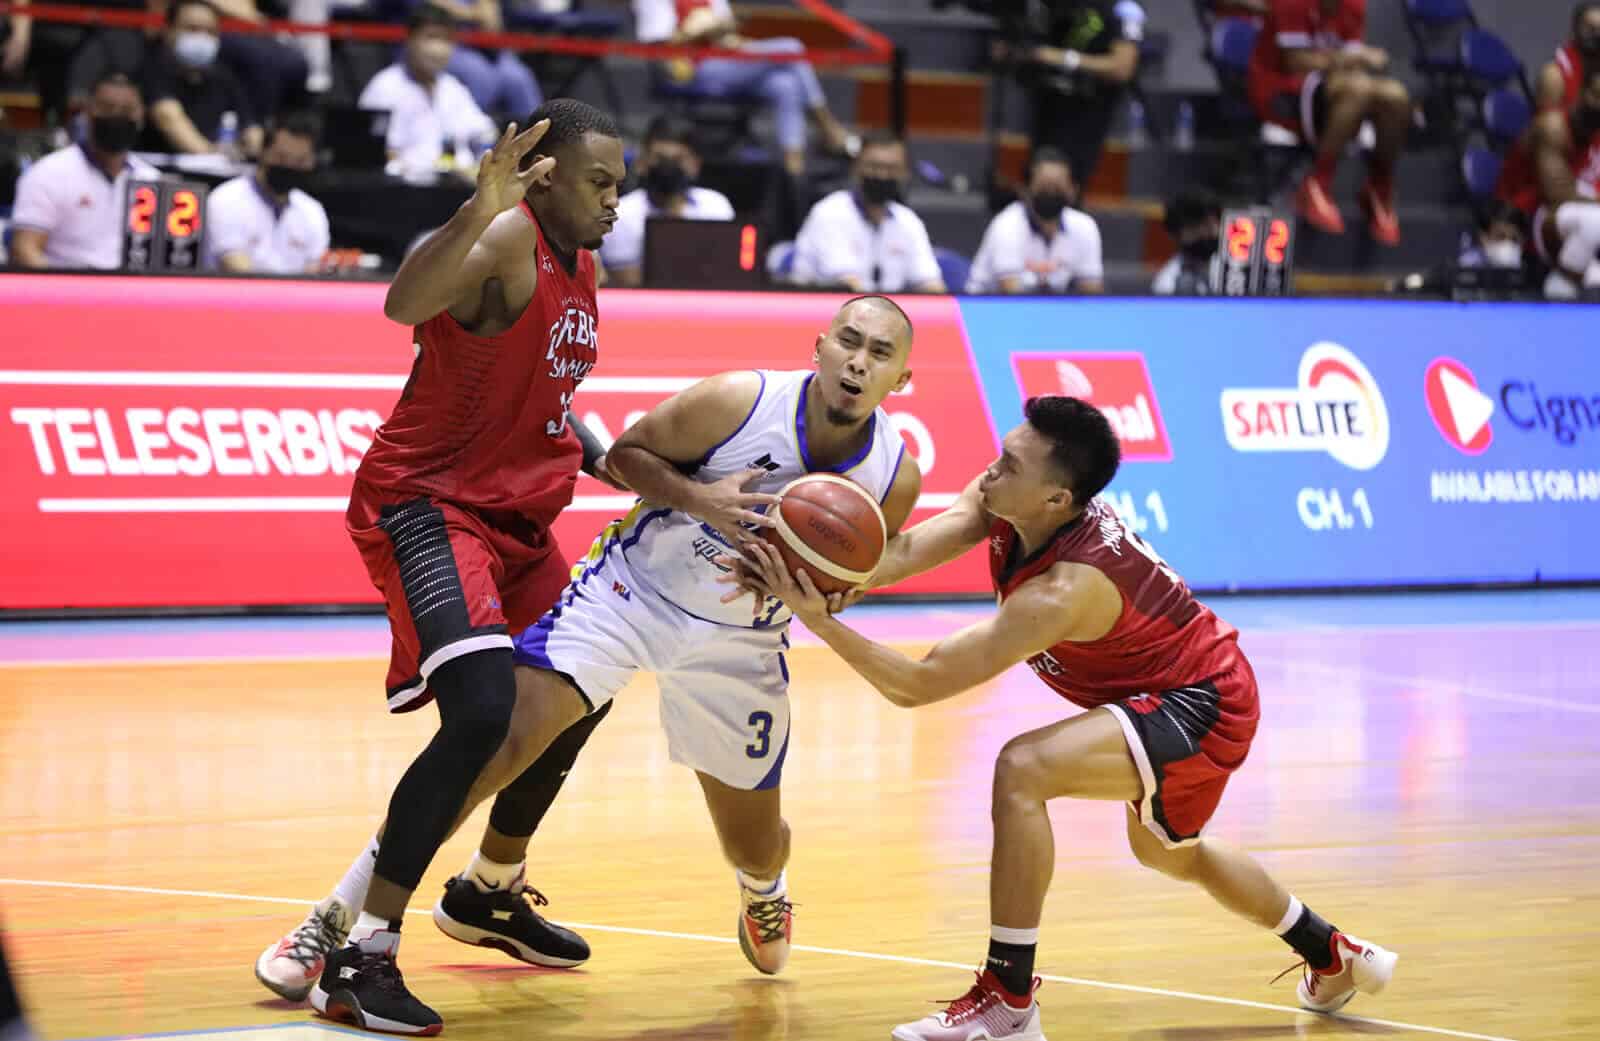 Two basketball players are competing in a crucial PBA match.